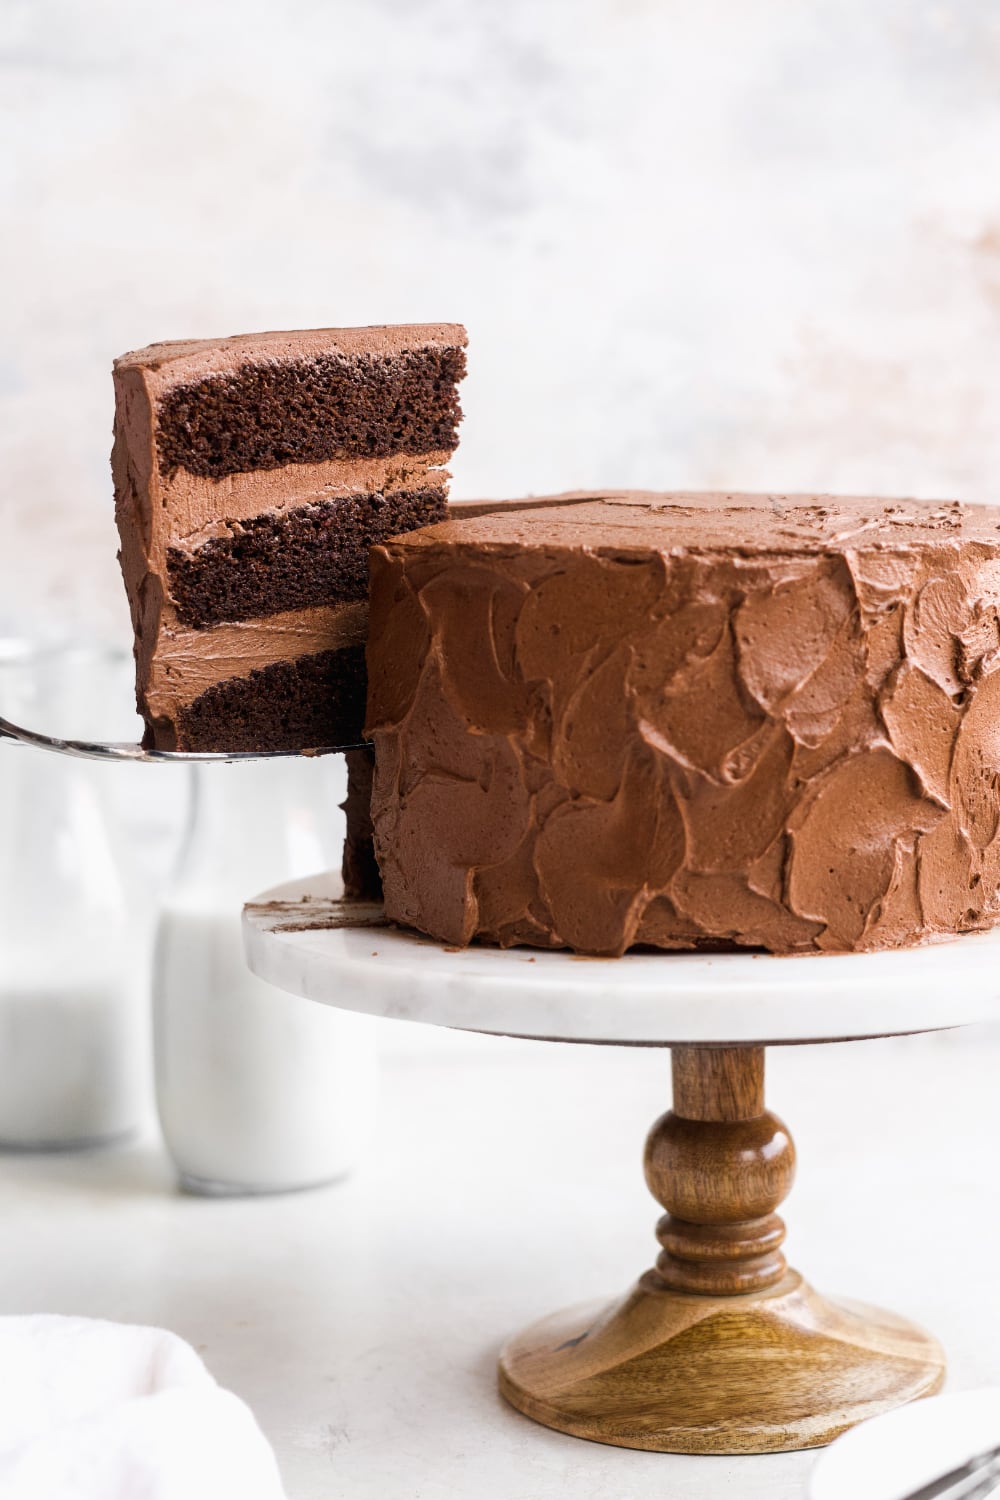 A slice of paleo chocolate cake being lifted from the cake stand.